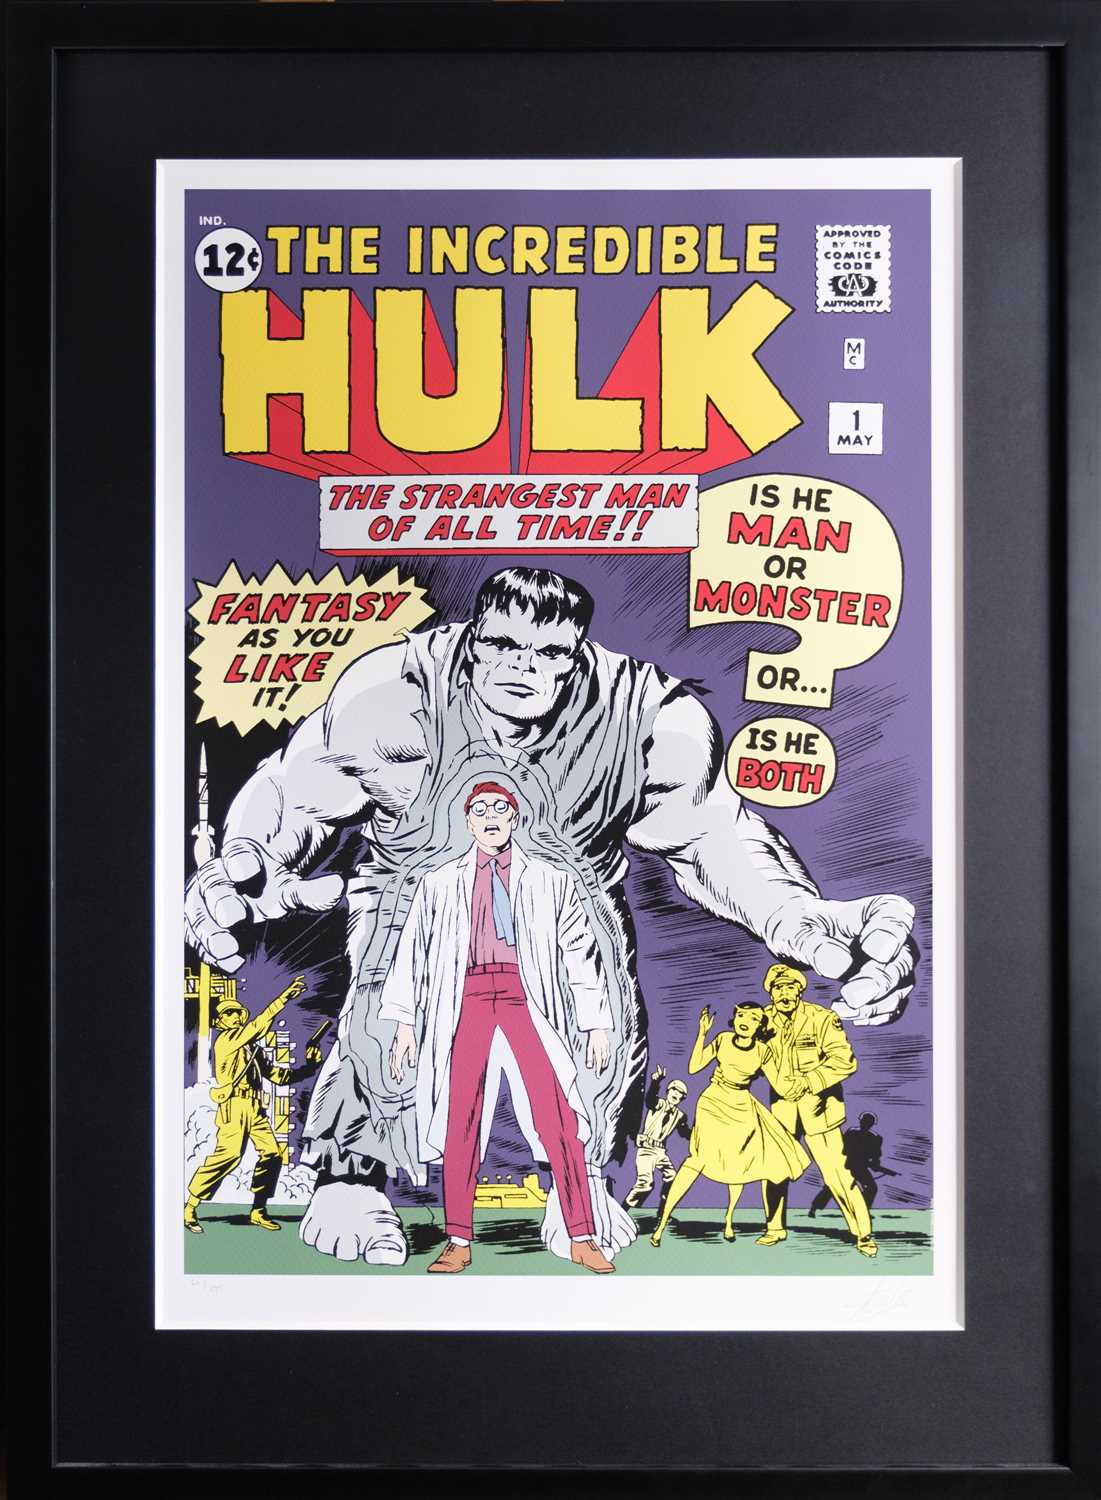 (Signed) Stan LEE (1922-2018) The Incredible Hulk #1 - The Strangest Man Of All Time! - Image 2 of 5